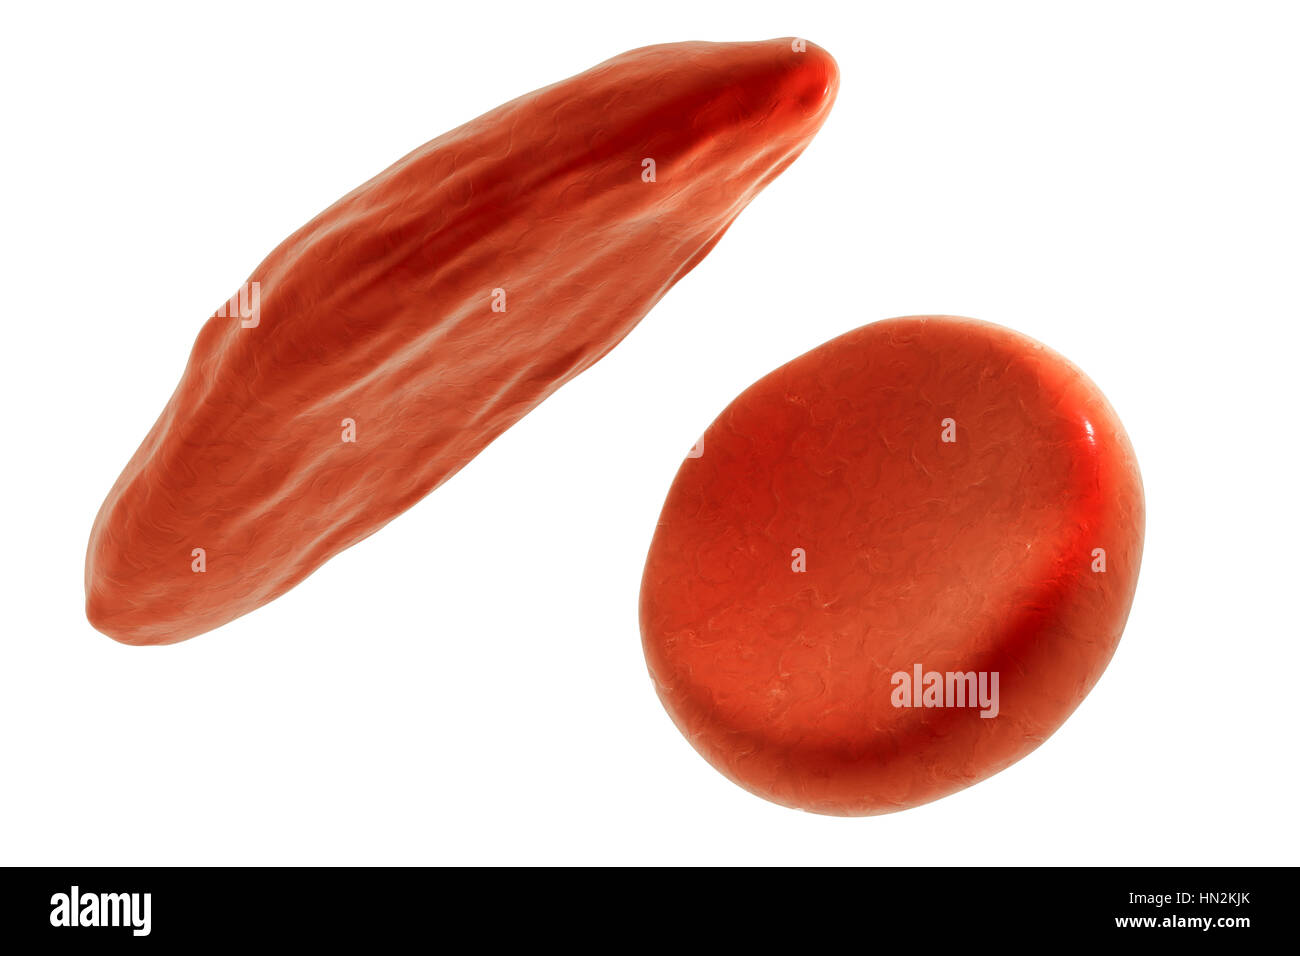 Computer illustration of normal red blood cells and crescent-shaped red blood cells as found in sickle cell anaemia. Stock Photo